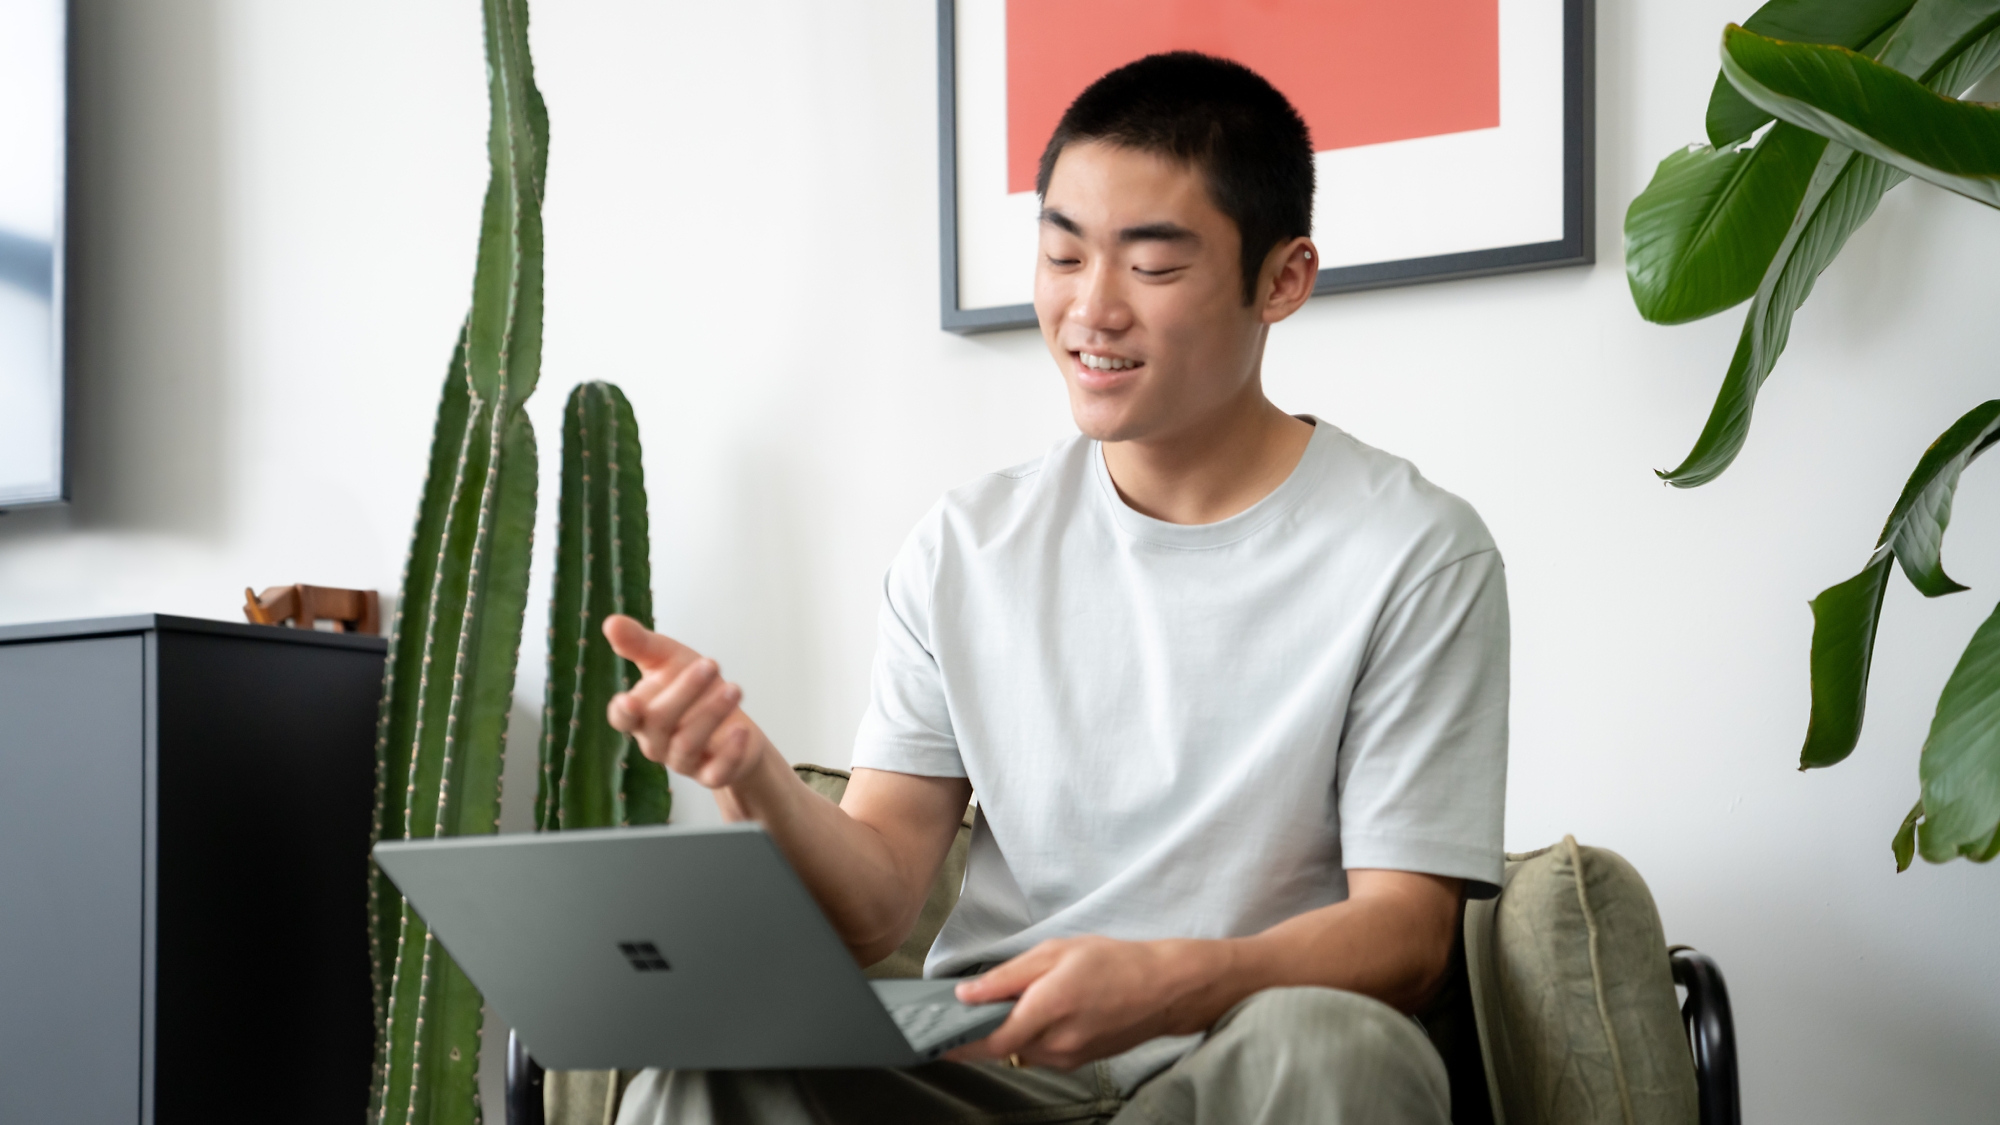 Young man happily using a laptop in a modern room with houseplants.